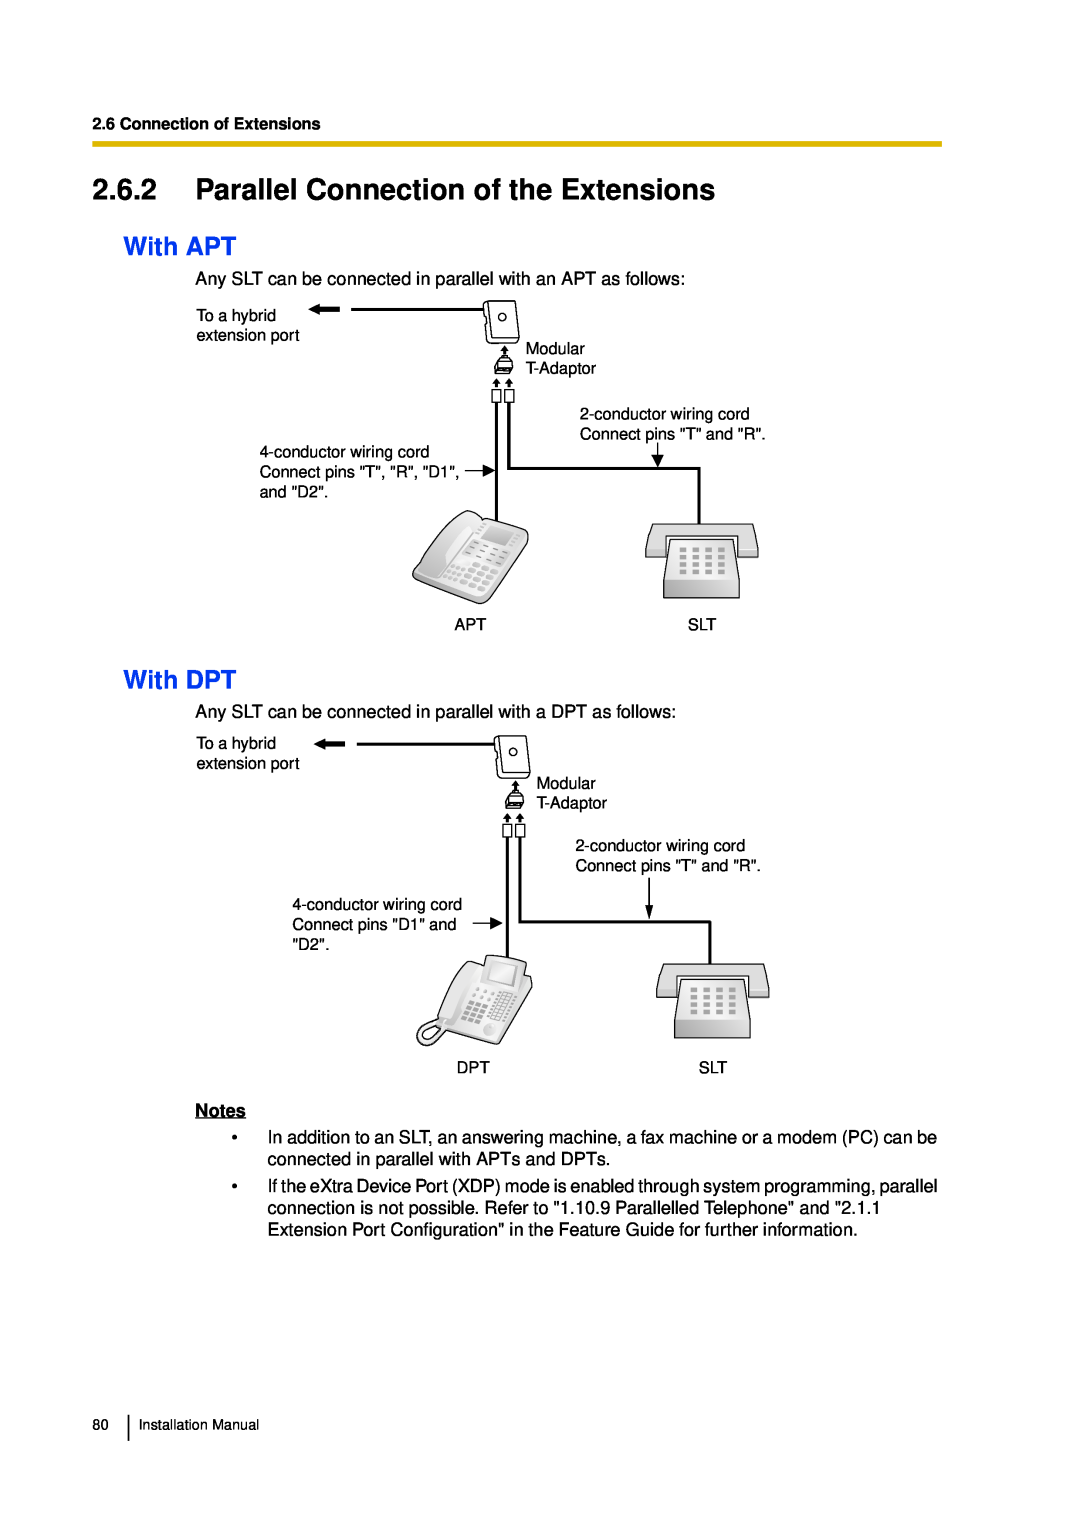 Panasonic KX-TDA30 installation manual 2.6.2Parallel Connection of the Extensions, With APT, With DPT, Notes 